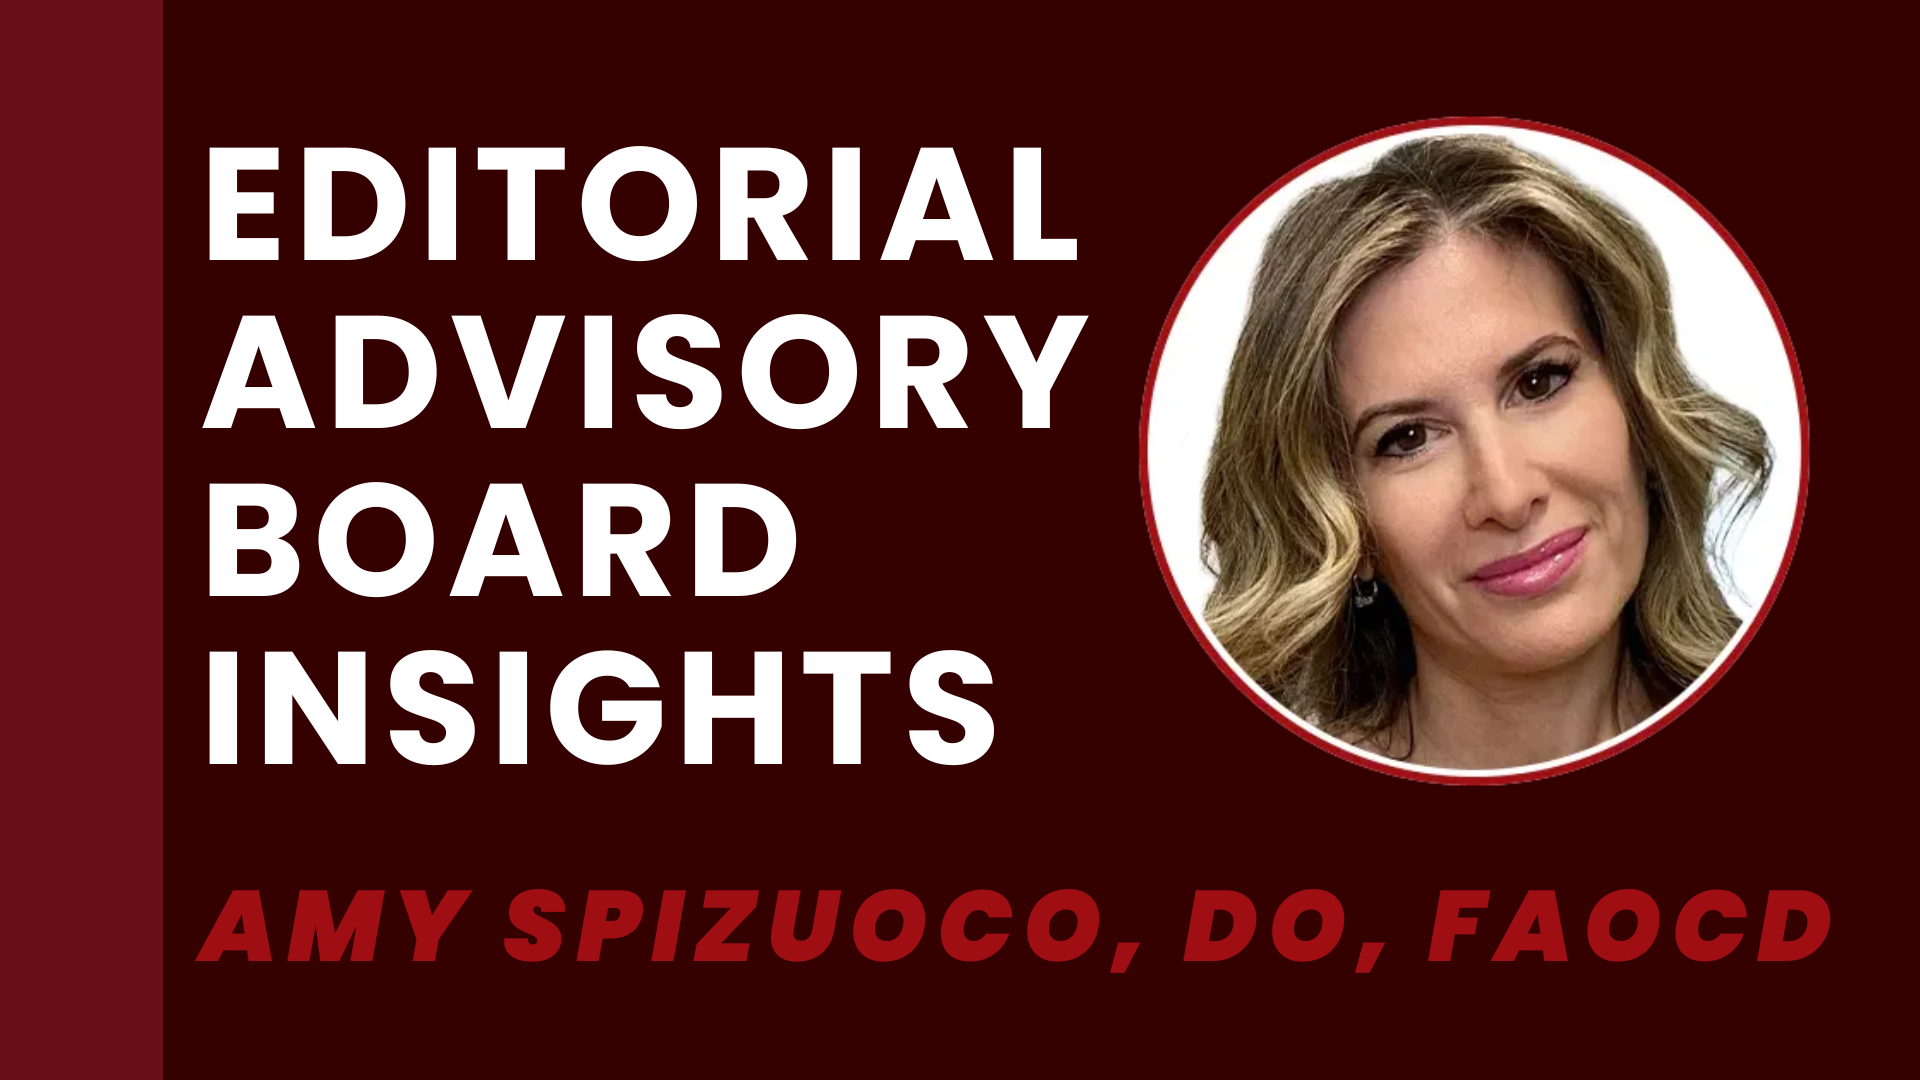 Editorial Advisory Board Insights for Eczema Awareness Month: Amy Spizuoco, DO, FAOCD